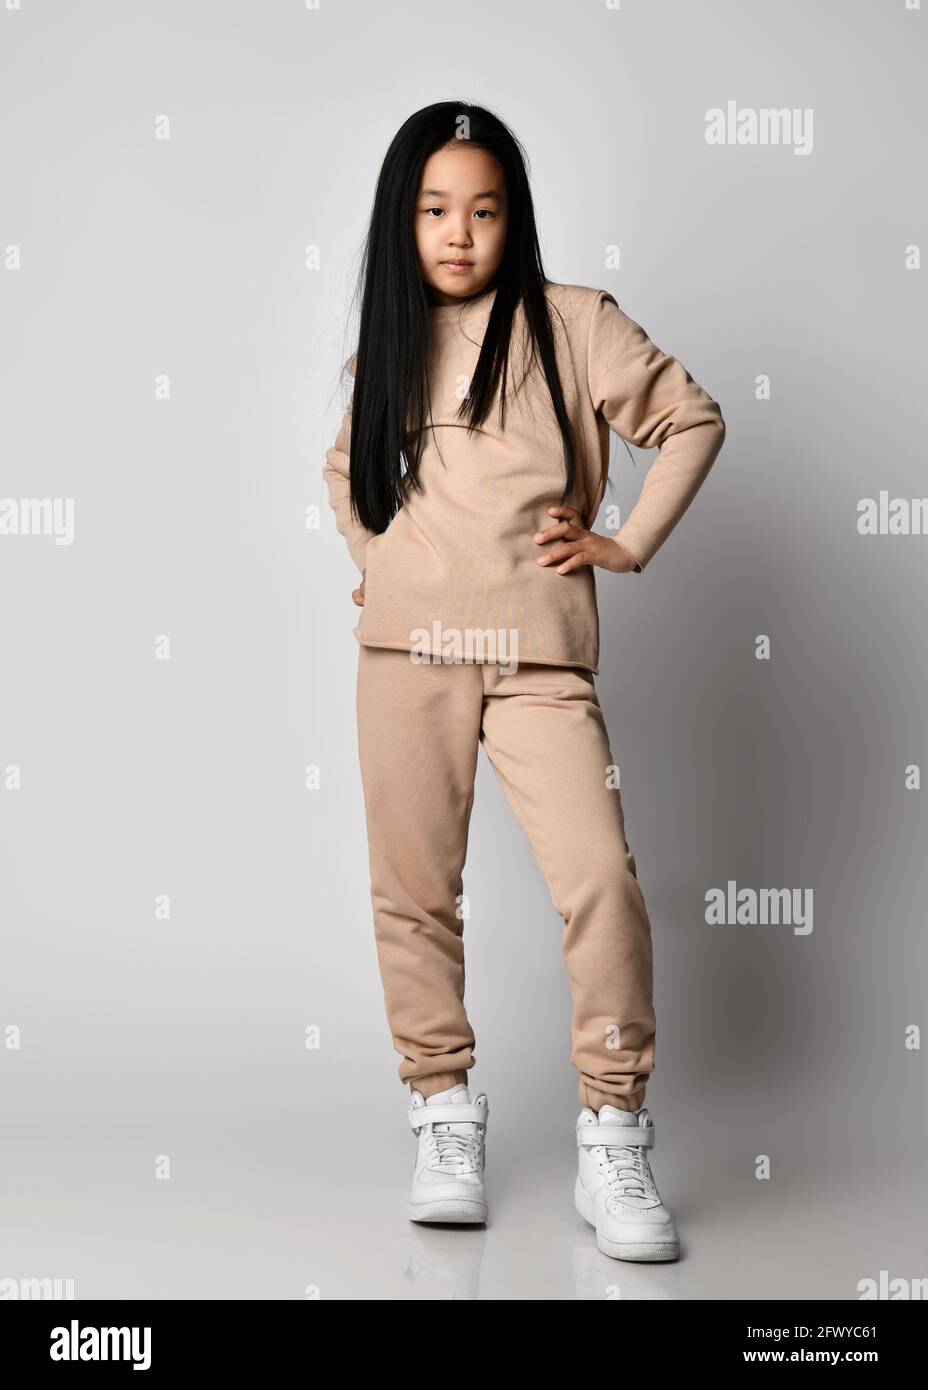 cool asian kid girl green pants hoodie sweater and sneakers stands holding hand at waist posing in new sportswear 2FWYC61